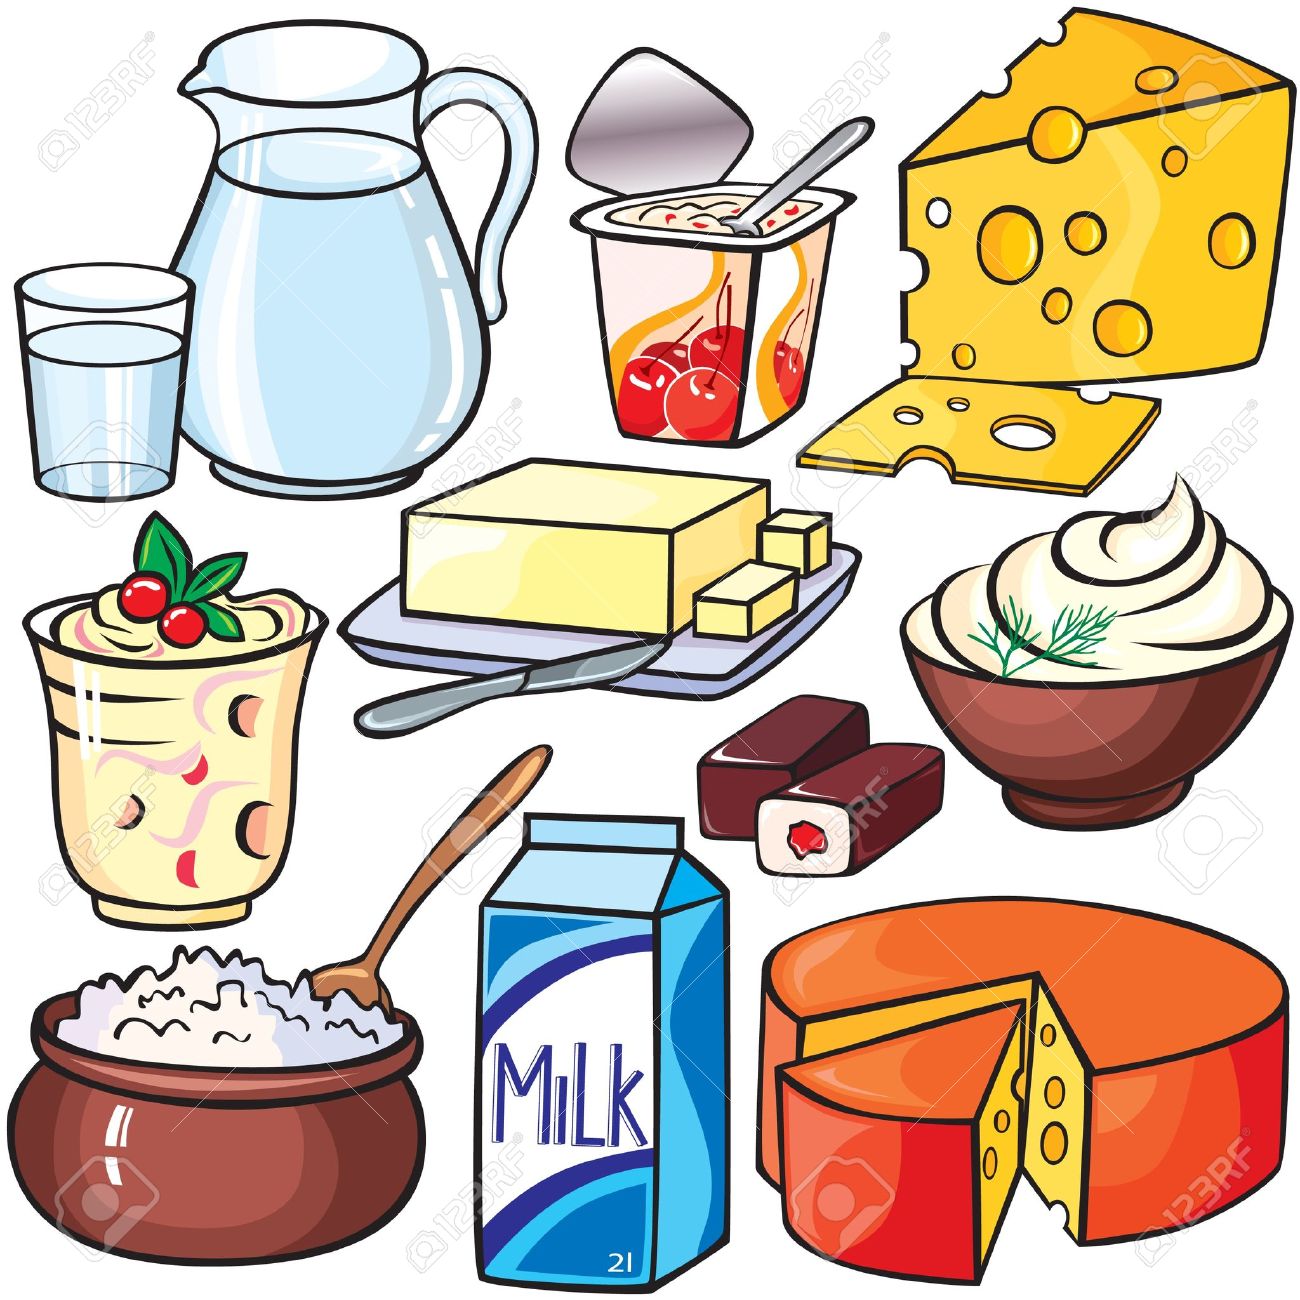 Milk and Dairy Clip Art